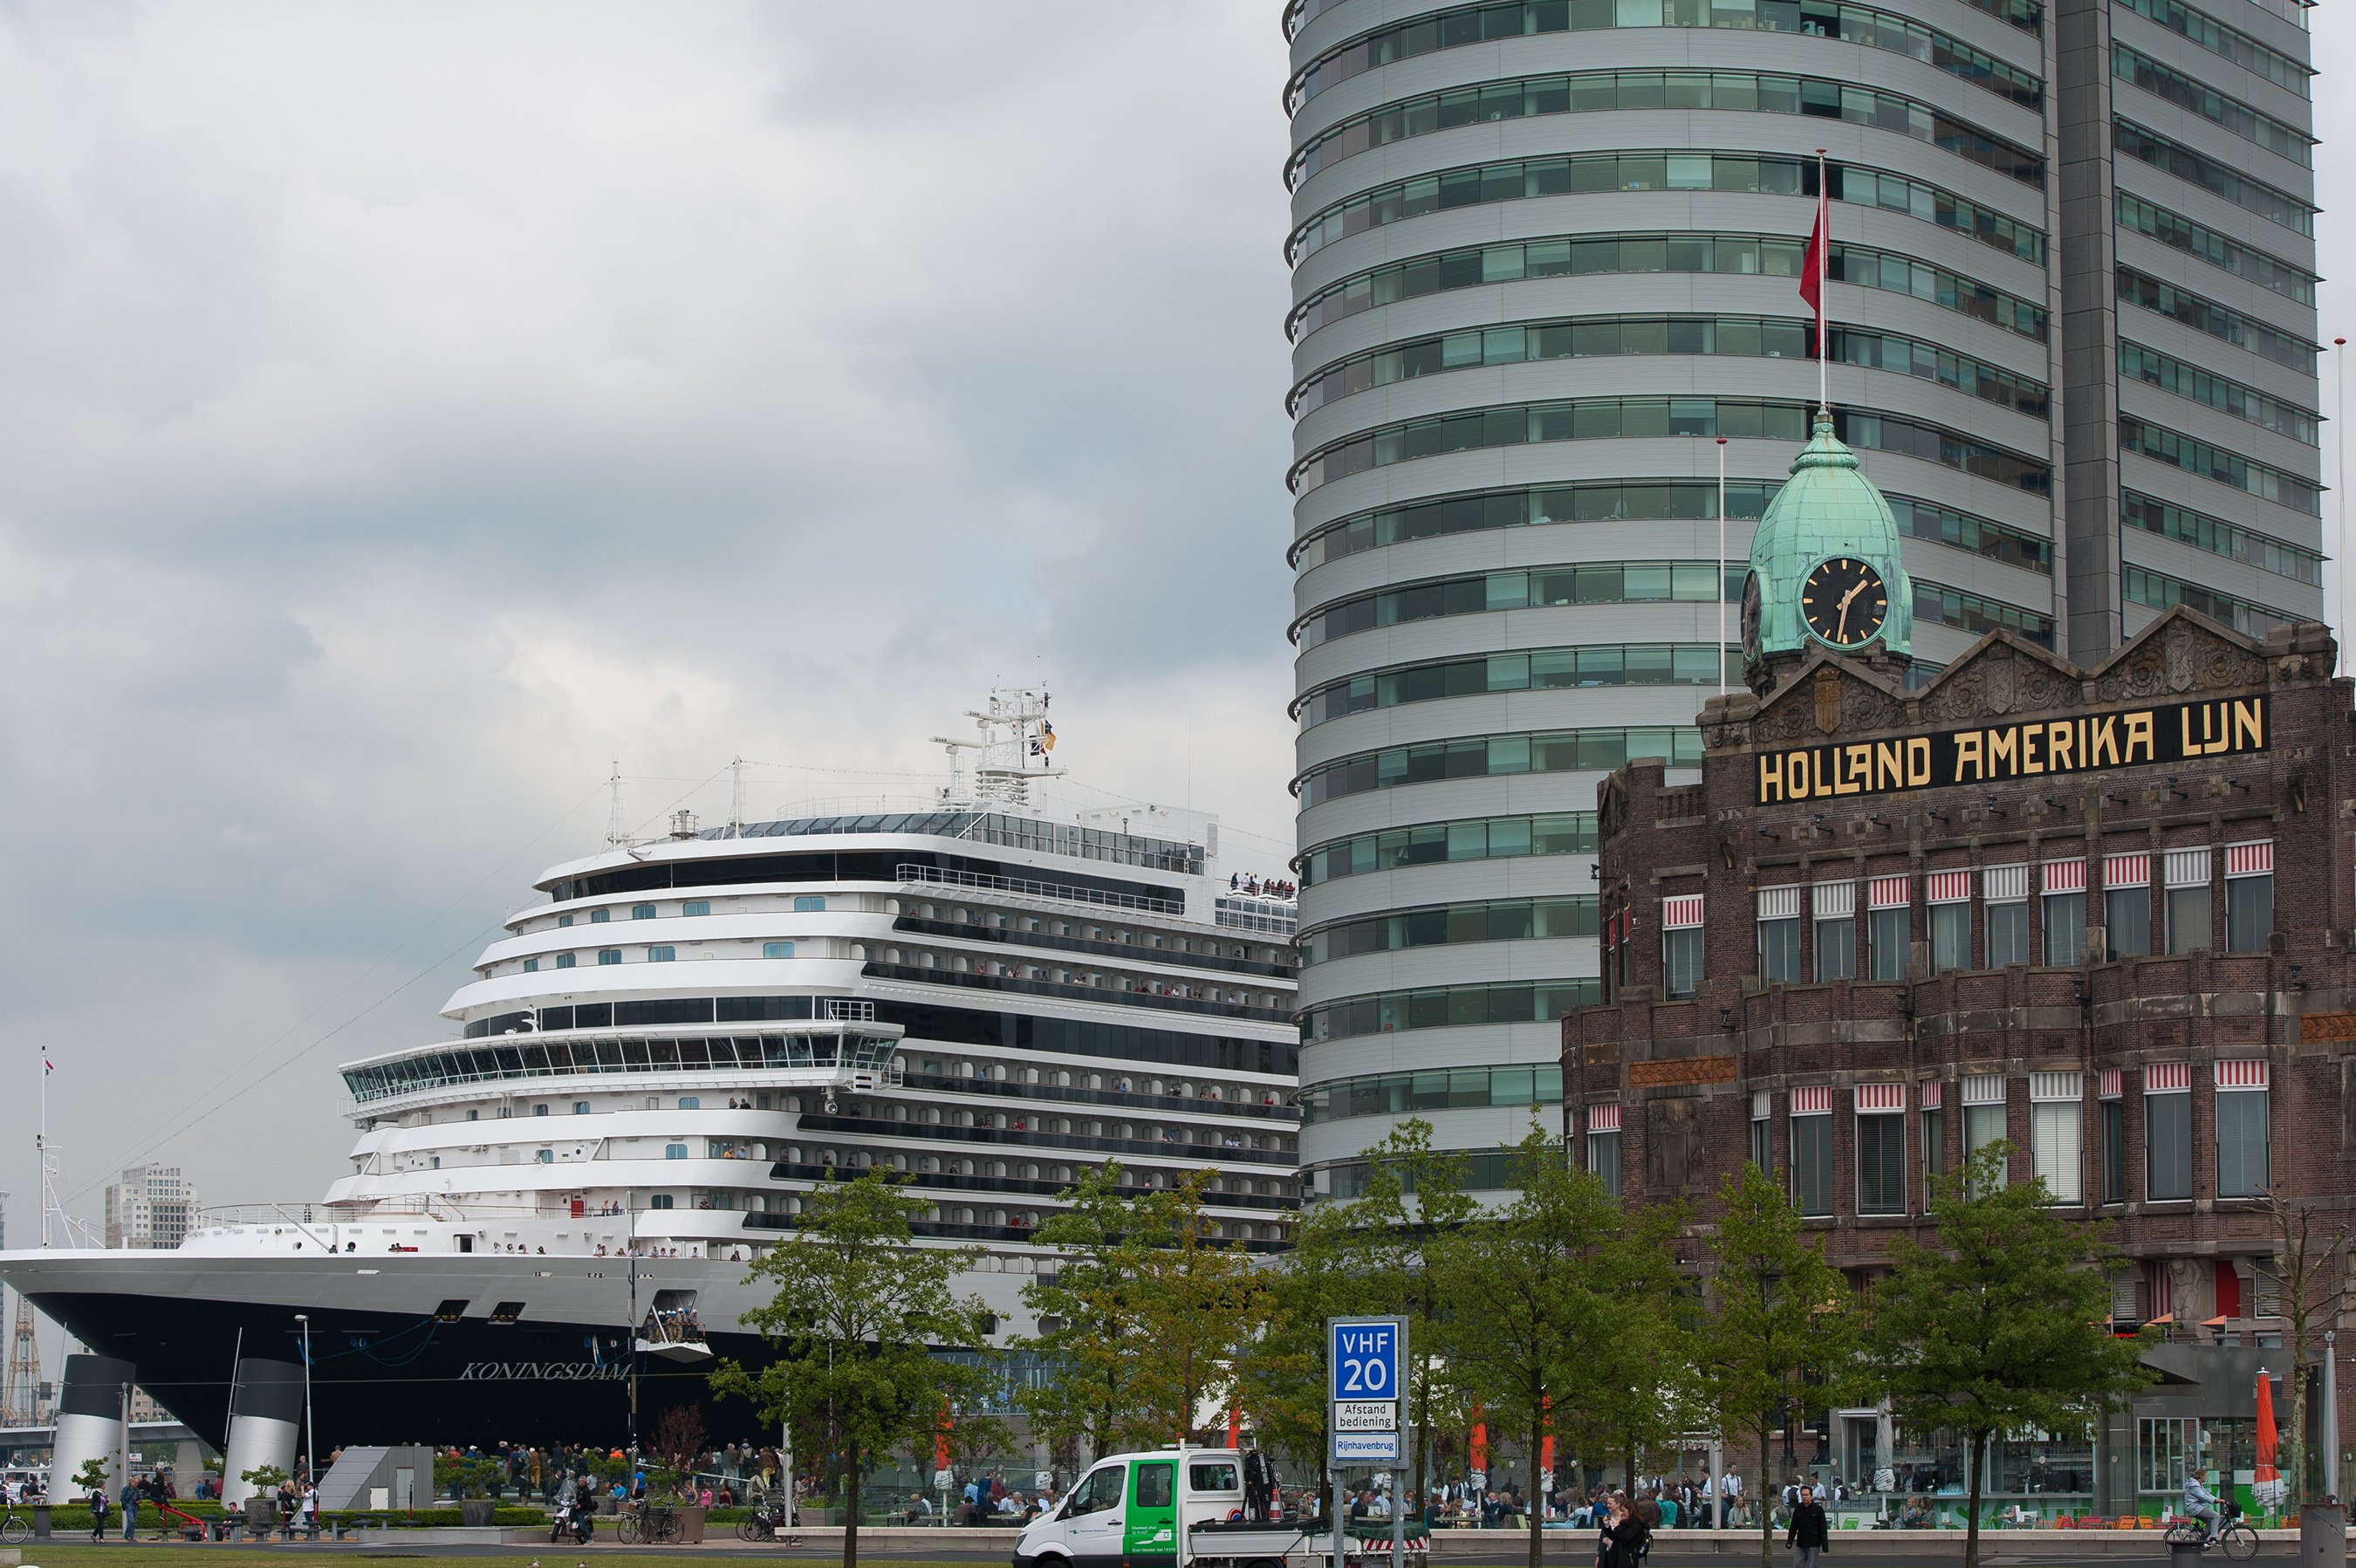 Ms Koningsdam at Rotterdam Cruise Terminal, located near the company’s original headquarters, now the Hotel New York (brick building to right). Holland America Line was founded in Rotterdam in 1872.